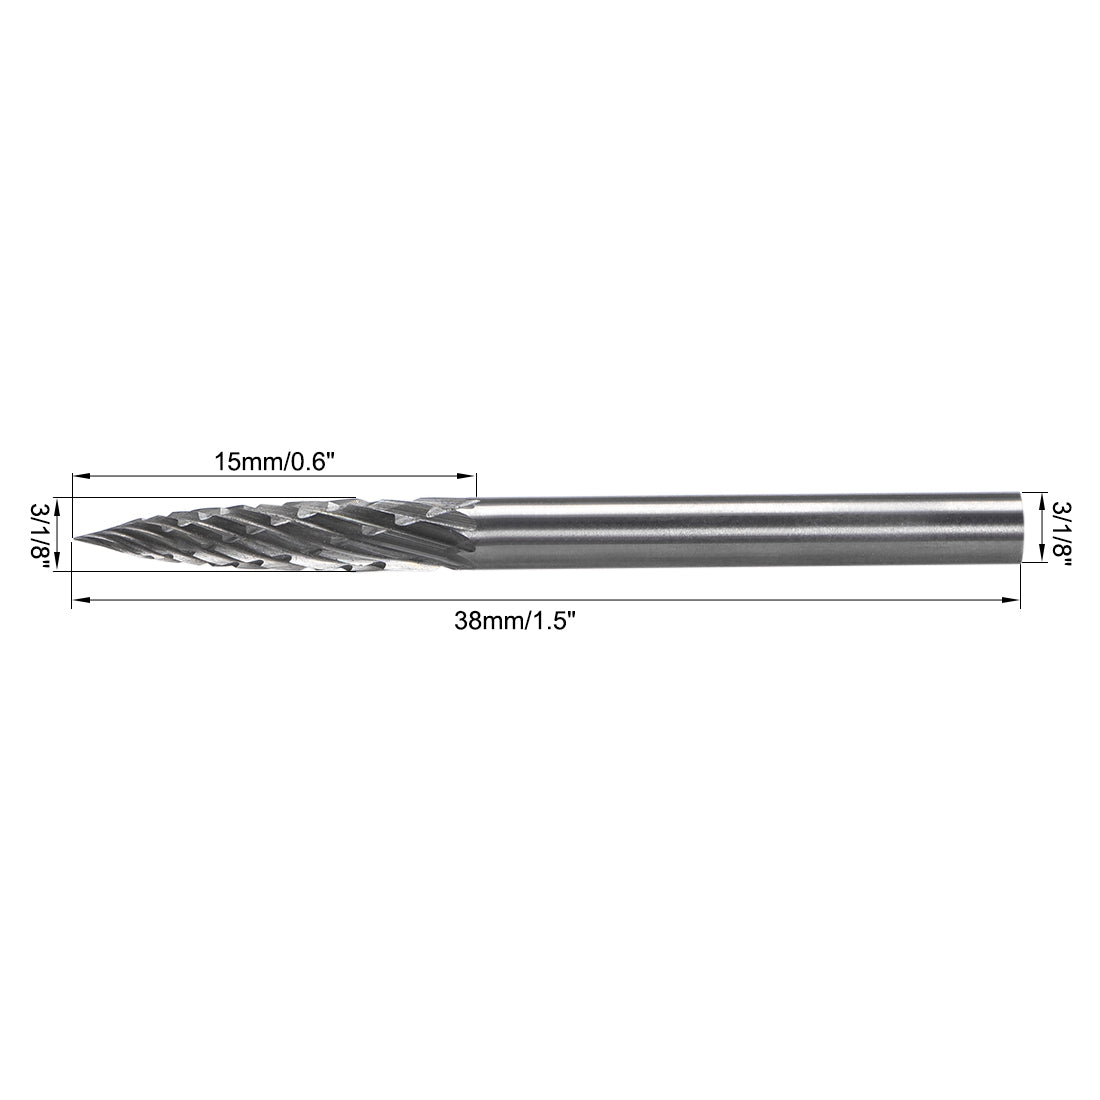 uxcell Uxcell Double Cut Rotary Burrs File Cone Shape 1/8" Shank Diameter 1/8" Head Size